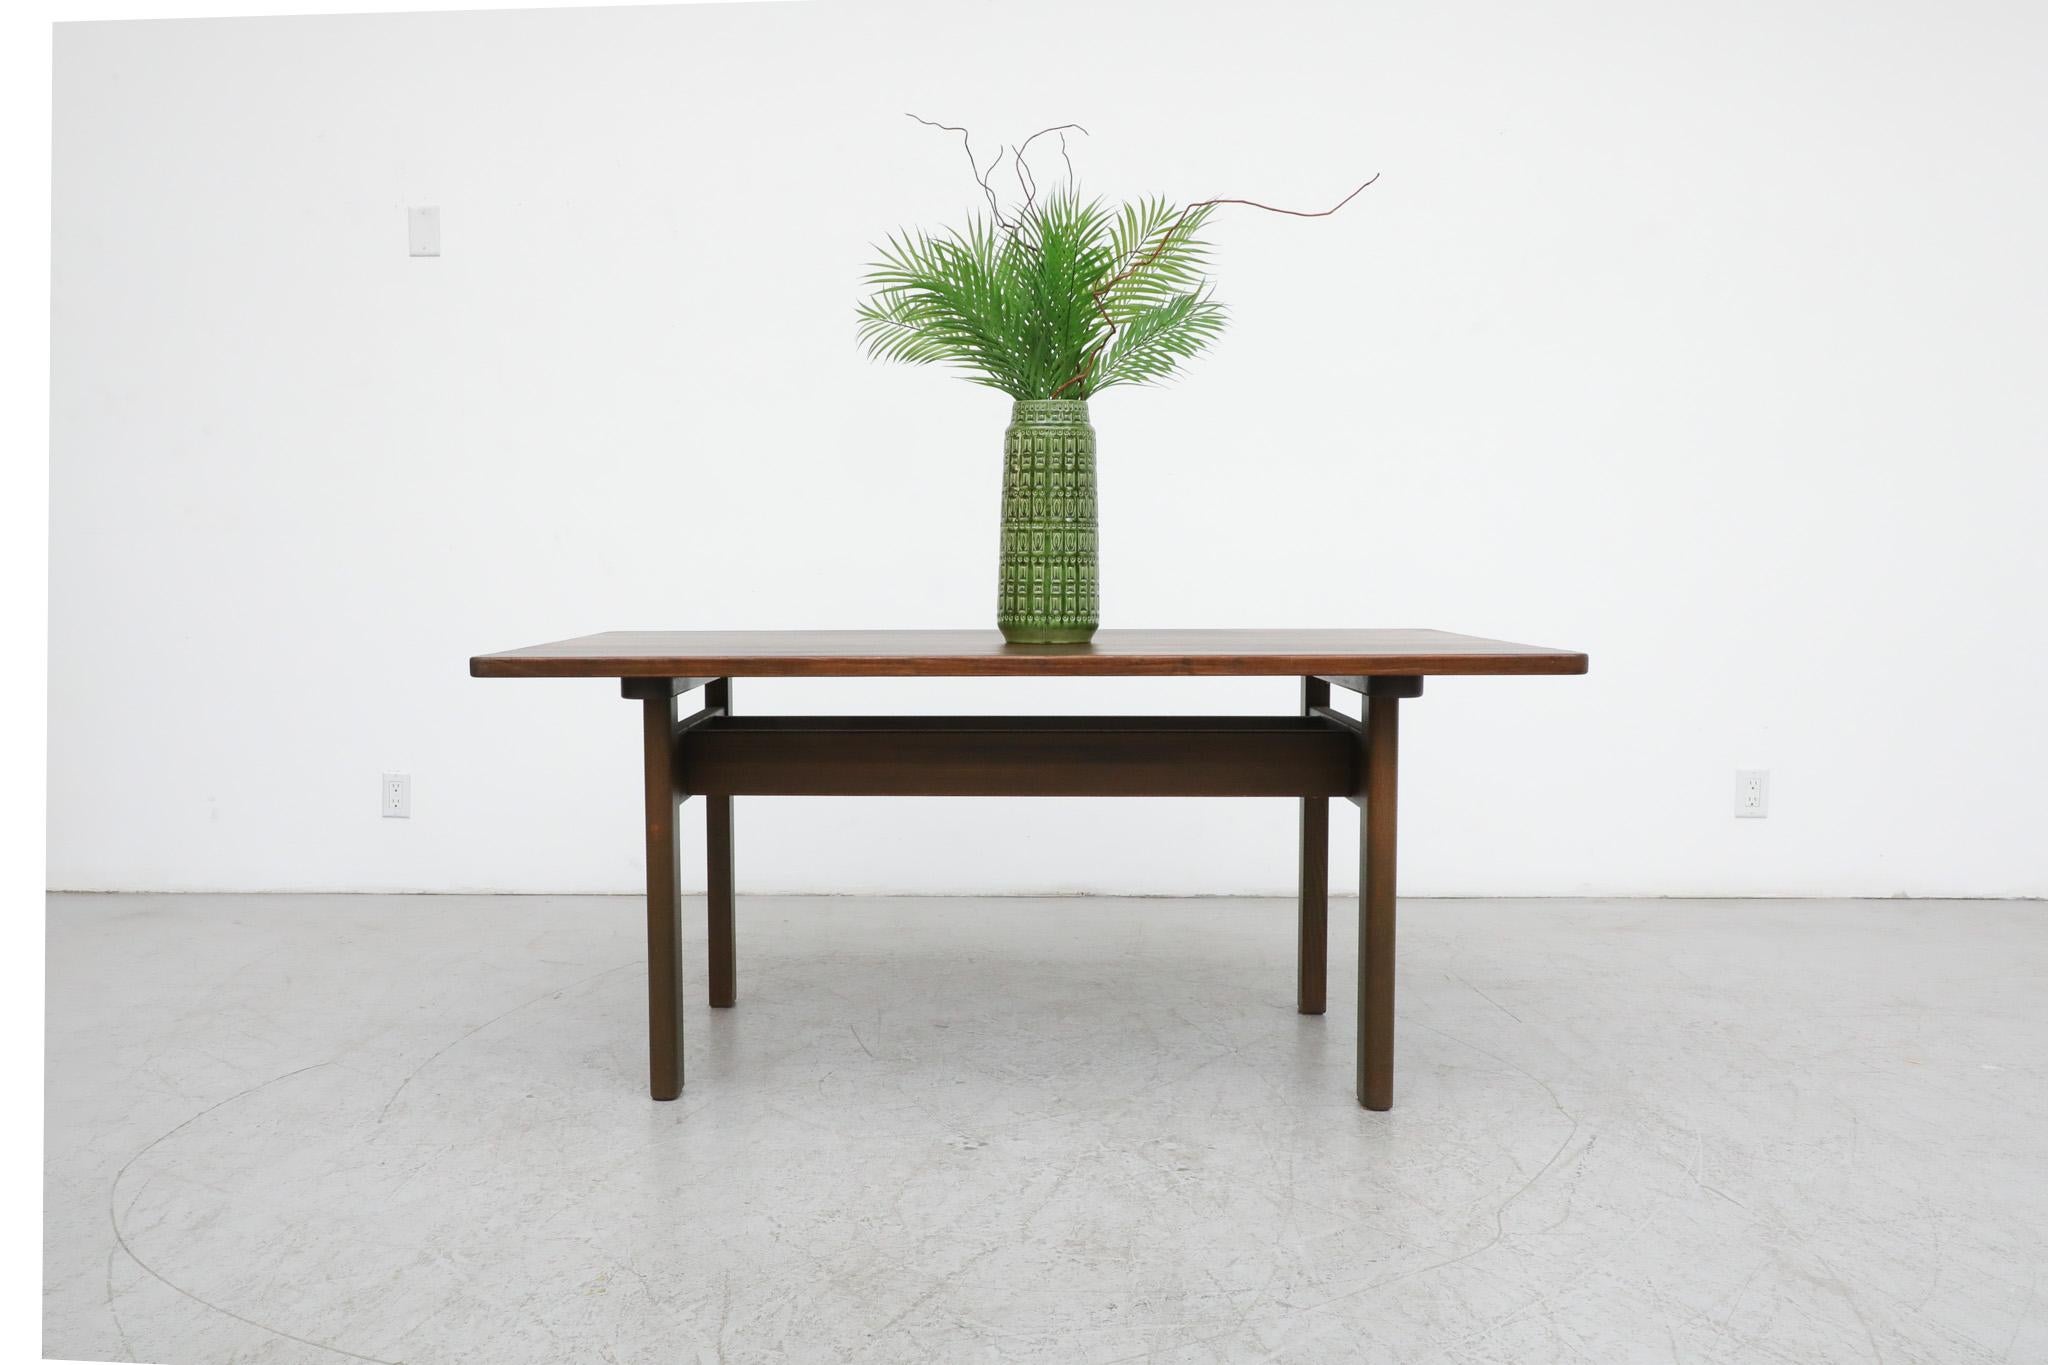 Mid-Century green stained 'Asserbo' dining table designed by Danish Mid-Century icon Børge Mogensen in 1961 for Carl Hansen & Søn. Mogensen was born in 1914 in Denmark. Traditionally trained as a cabinetmaker he went on to study furniture design at